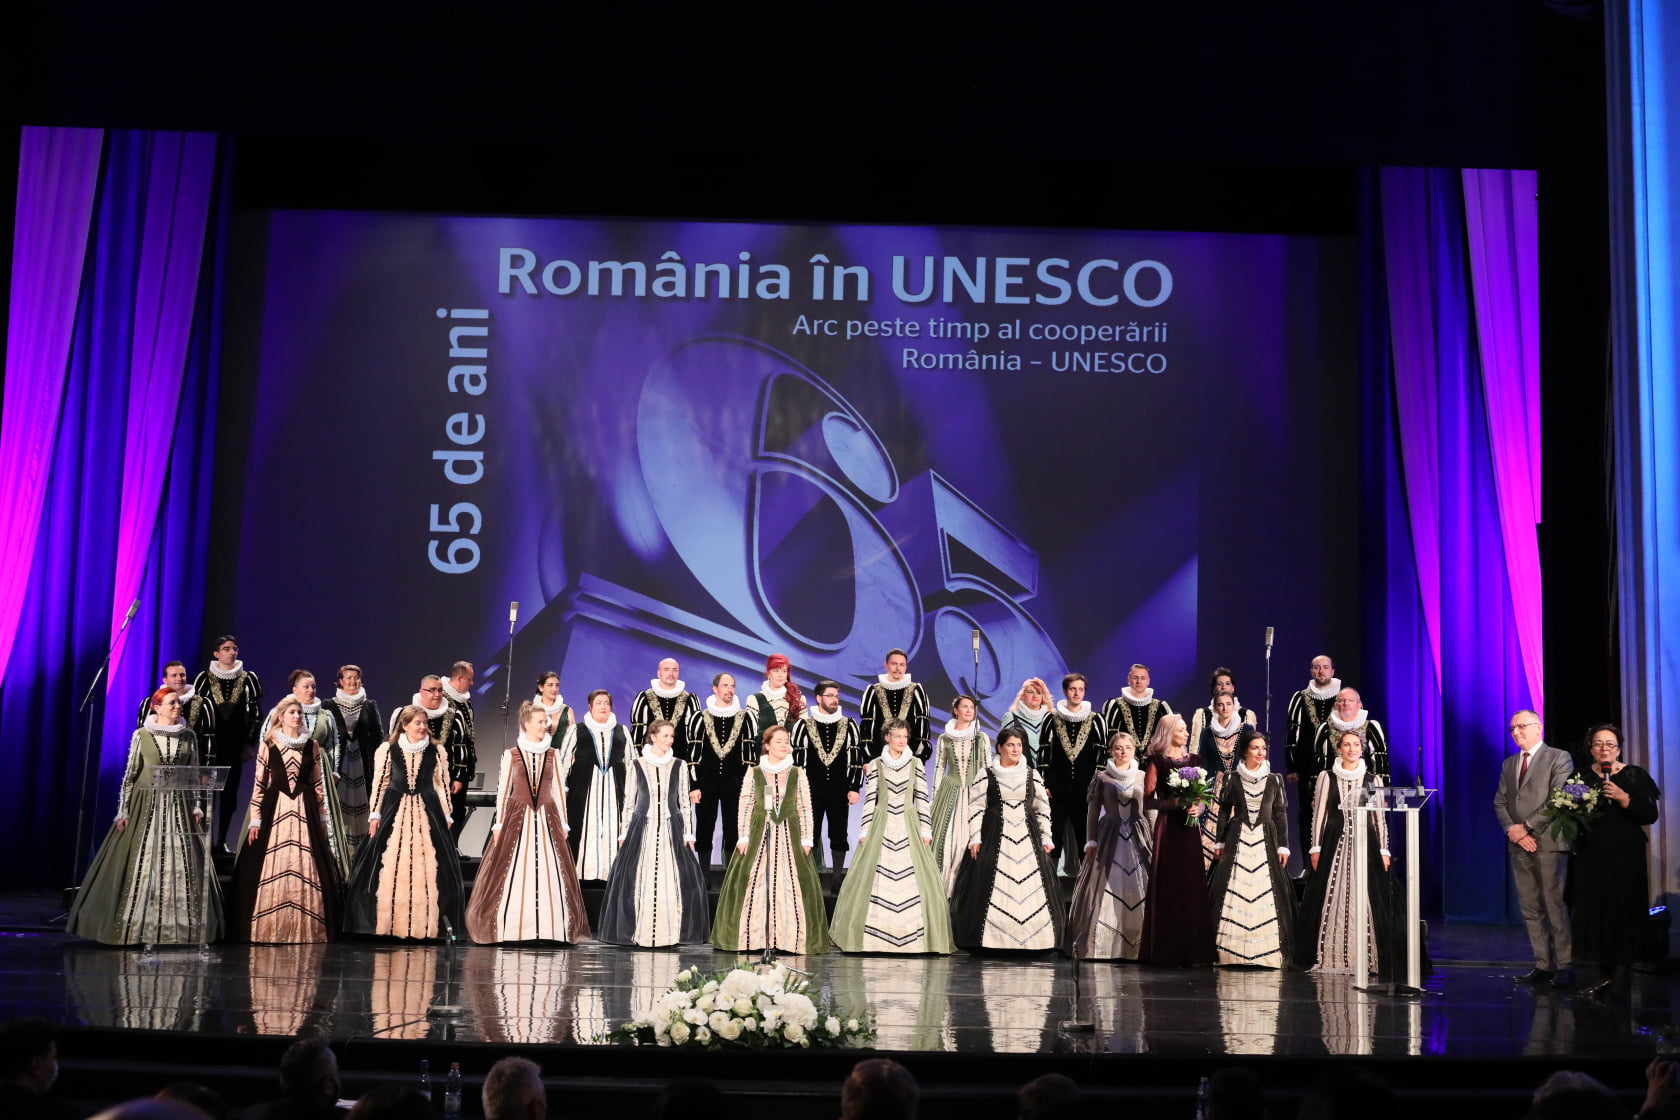 65 years of Romania in UNESCO, festively marked during the anniversary event ”Romania and UNESCO, bridges over time”